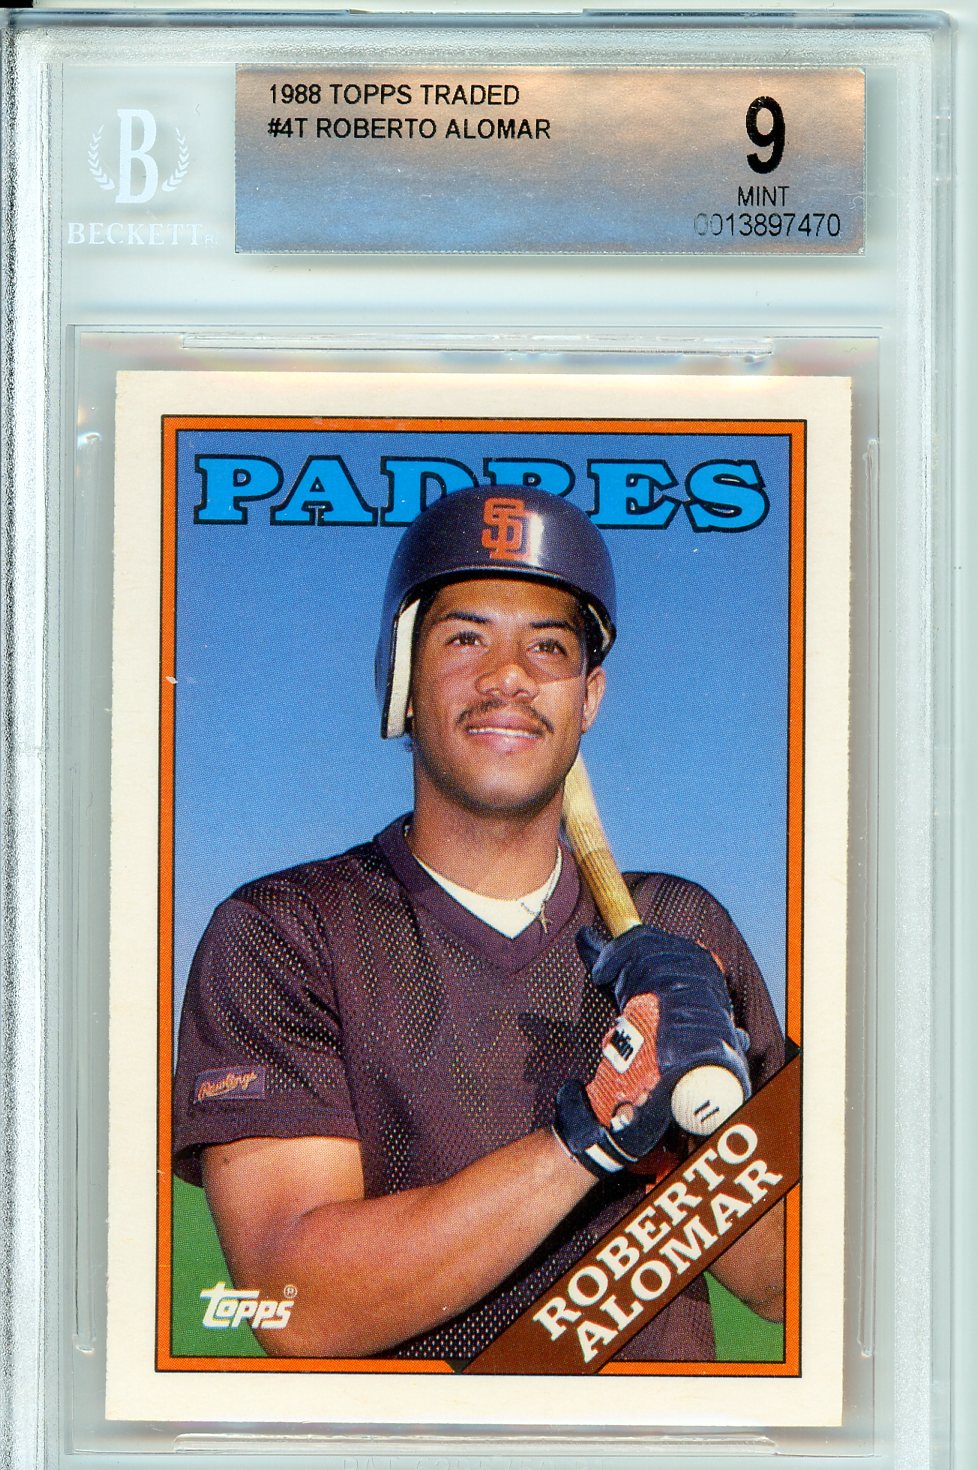 1988 Topps Traded #4T Roberto Alomar Rookie Card BGS 9